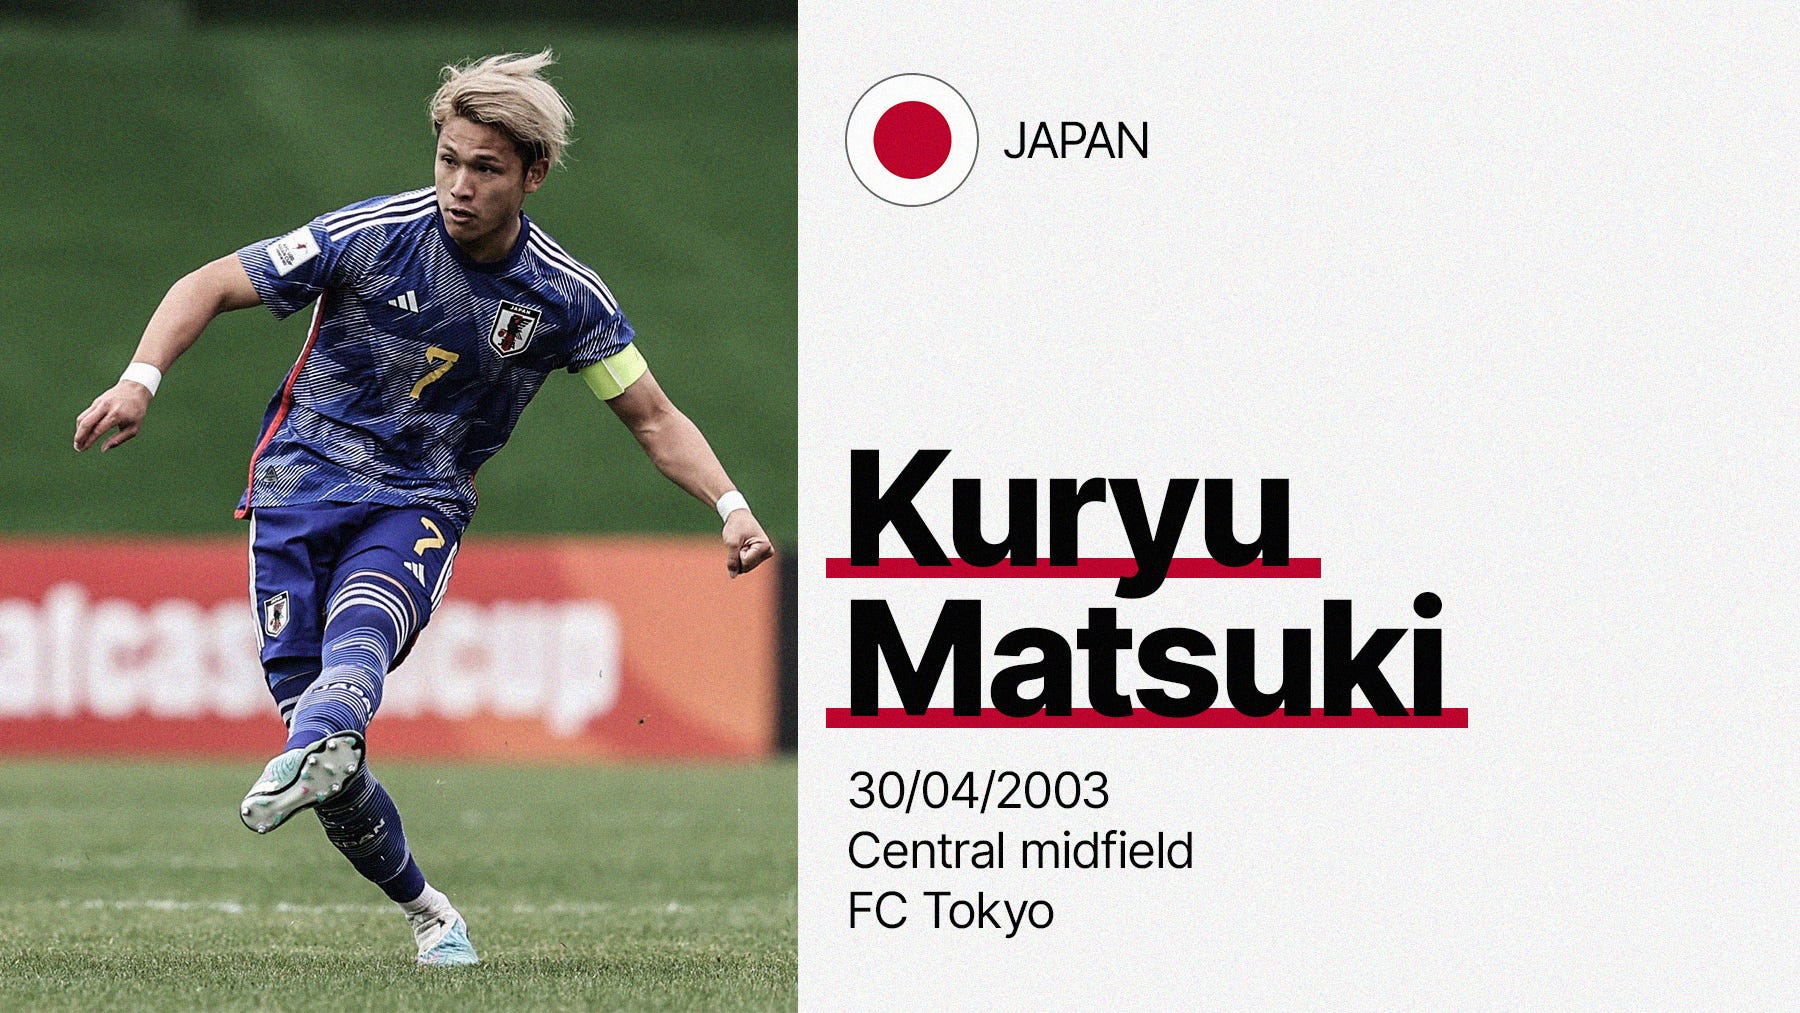 A photo of Kuryu Matsuki playing for Japan's U-20 team with a brief information panel about him, including Japan flag, date of birth, position and club.